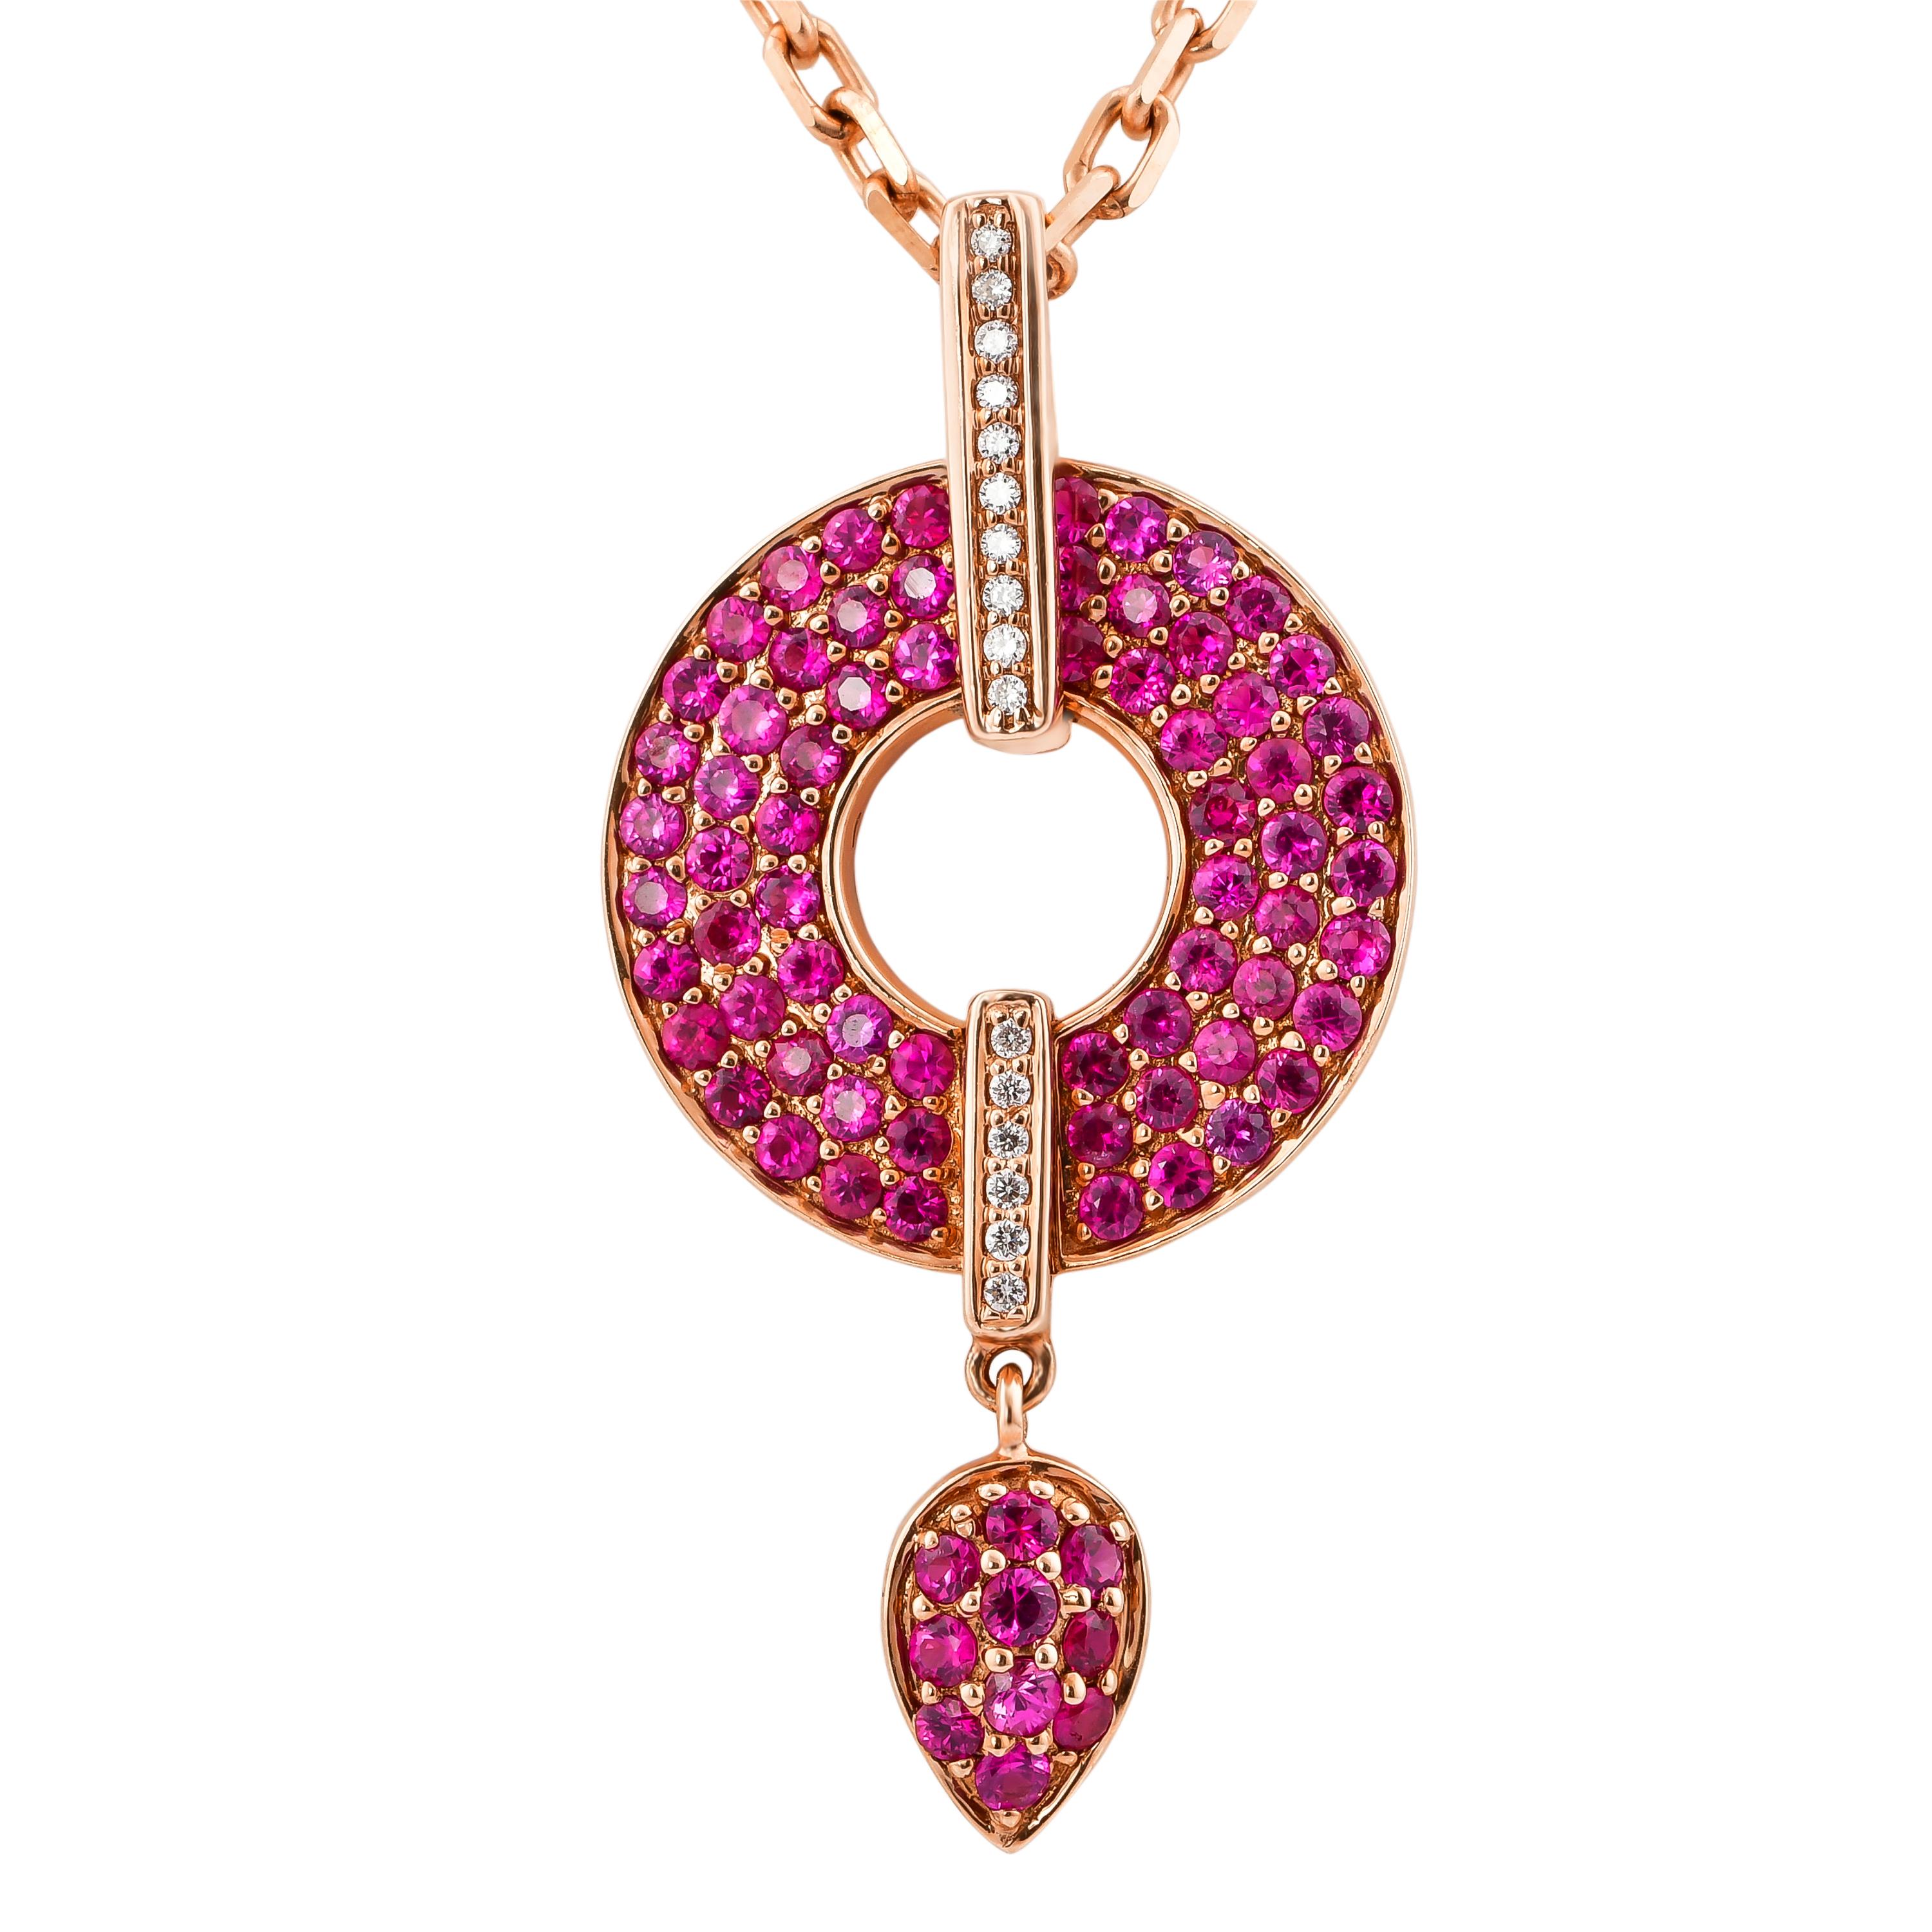 An exclusive collection of designer and unique cocktail pendants by Sunita Nahata Fine Design. 

Ruby Cocktail Pendant in 14 Karat Rose Gold

Ruby: 1.30 carat, 1.50 Size, Round Shape.
Ruby: 0.085 carat, 1.80 Size, Round Shape.
Ruby: 0.145 carat,